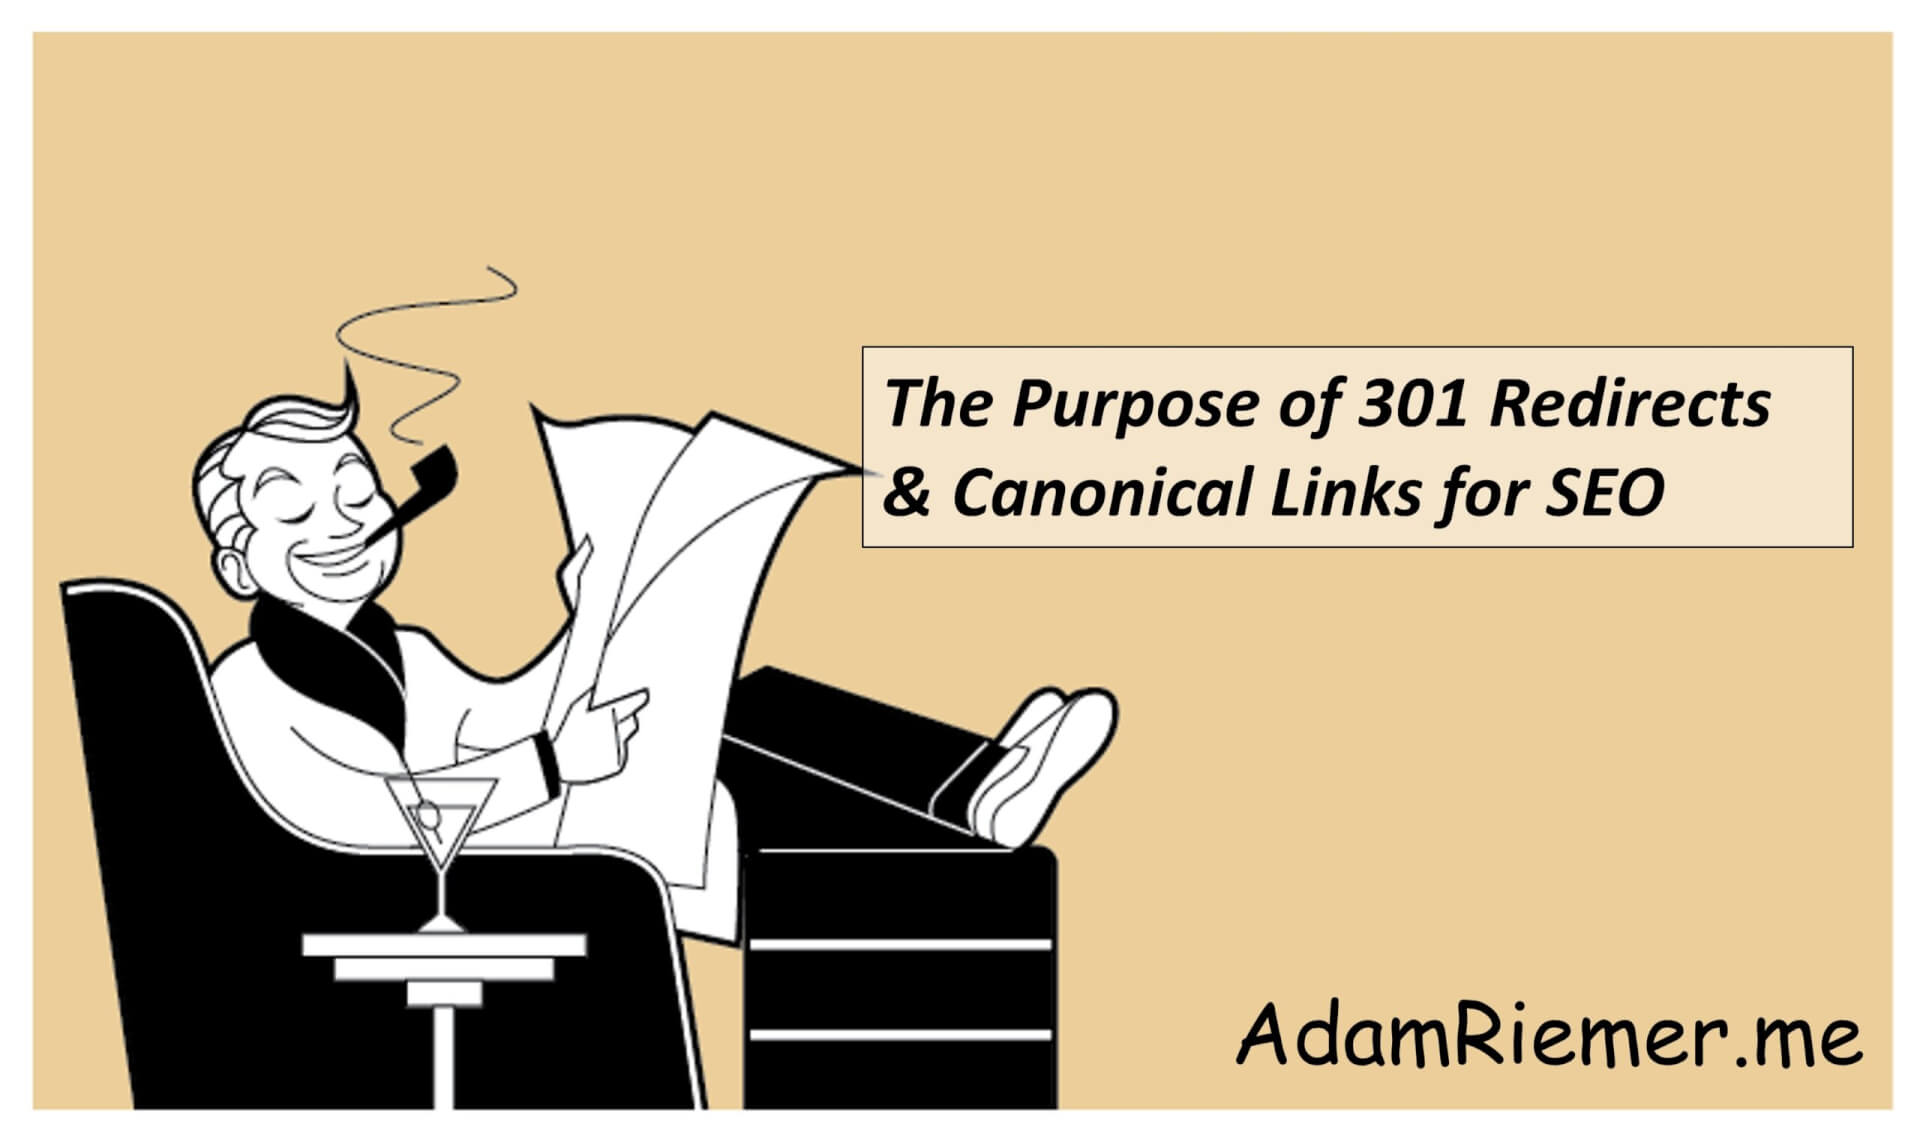 The Purpose of 301 Redirects and Canonical Links for SEO